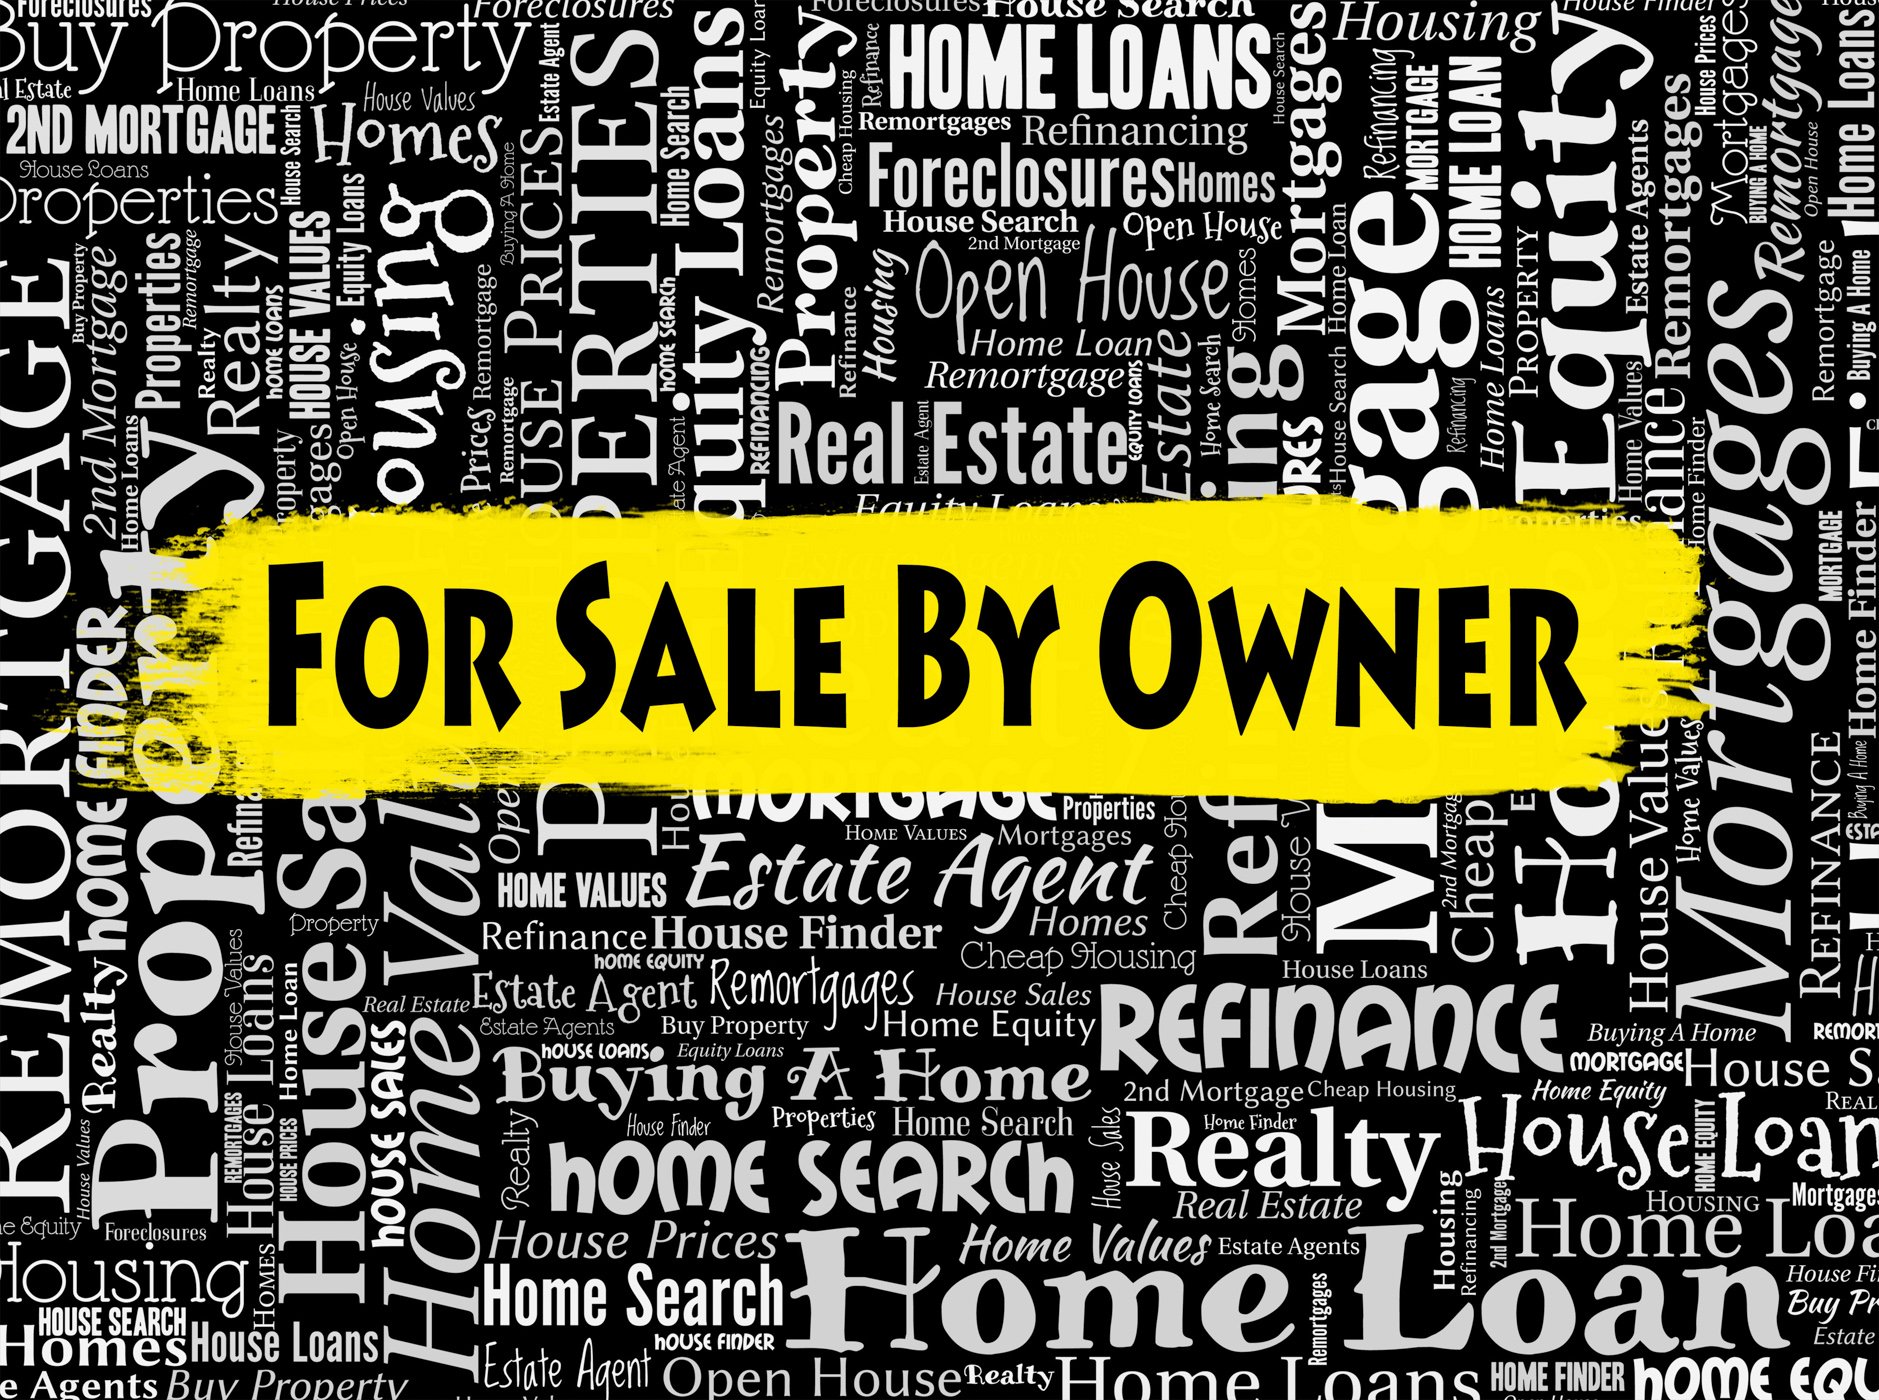 Sale by owner indicates on market and display photo